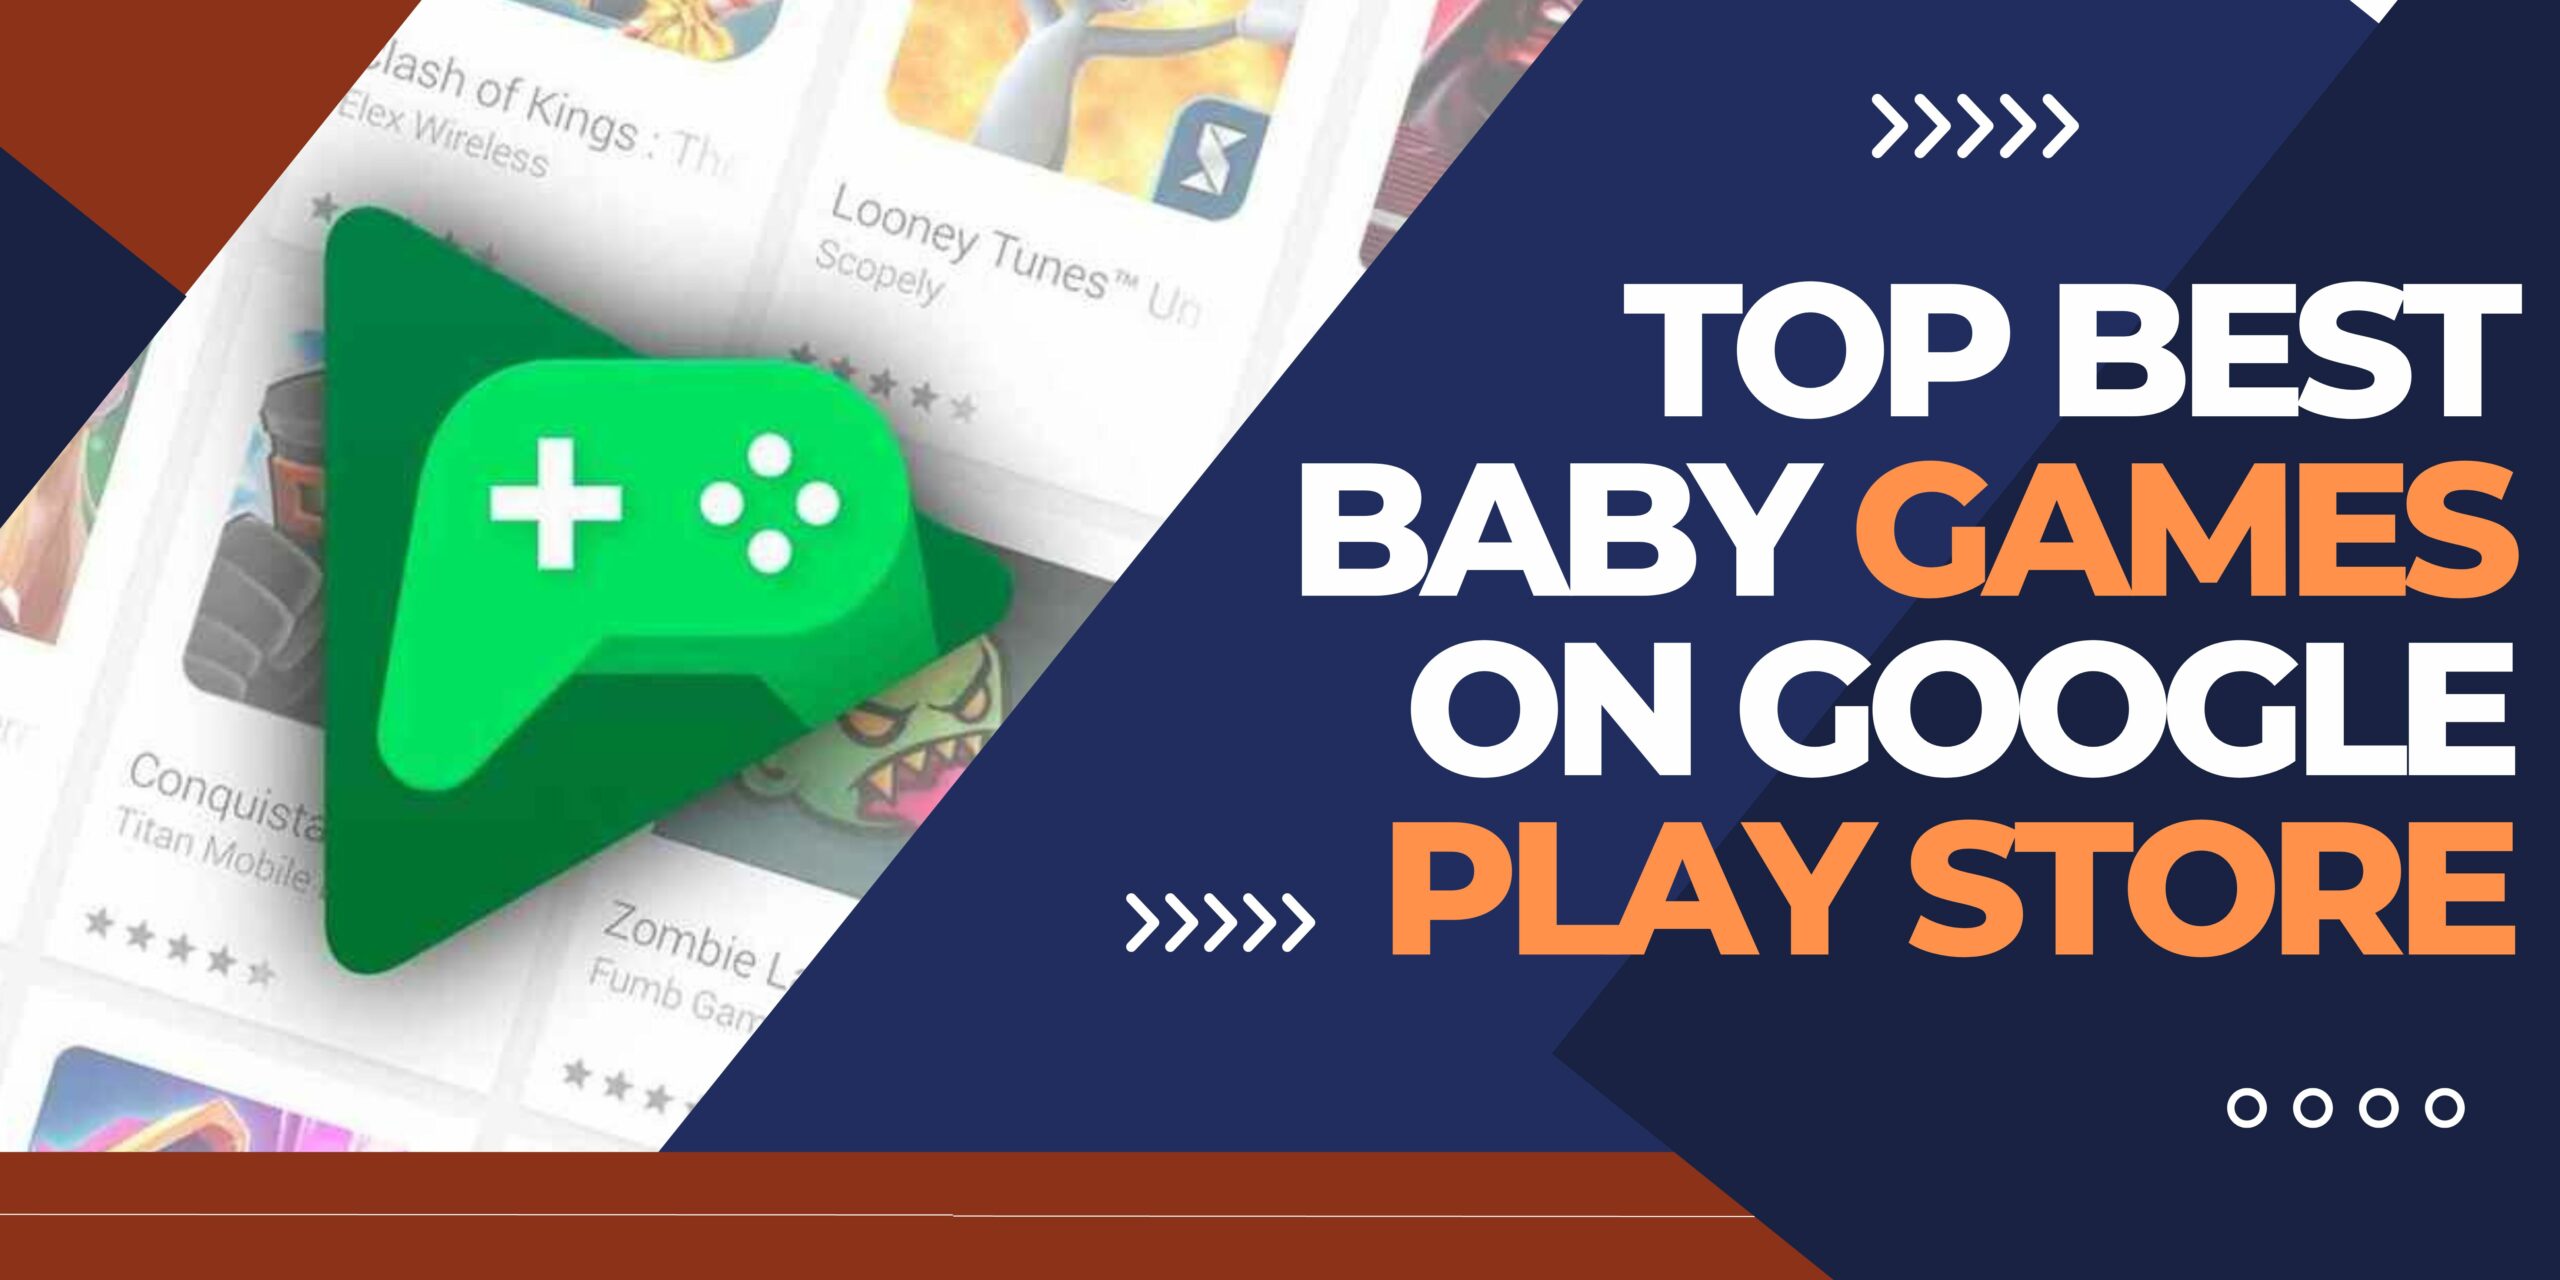 an image of Top Best Baby Games on Google Play Store